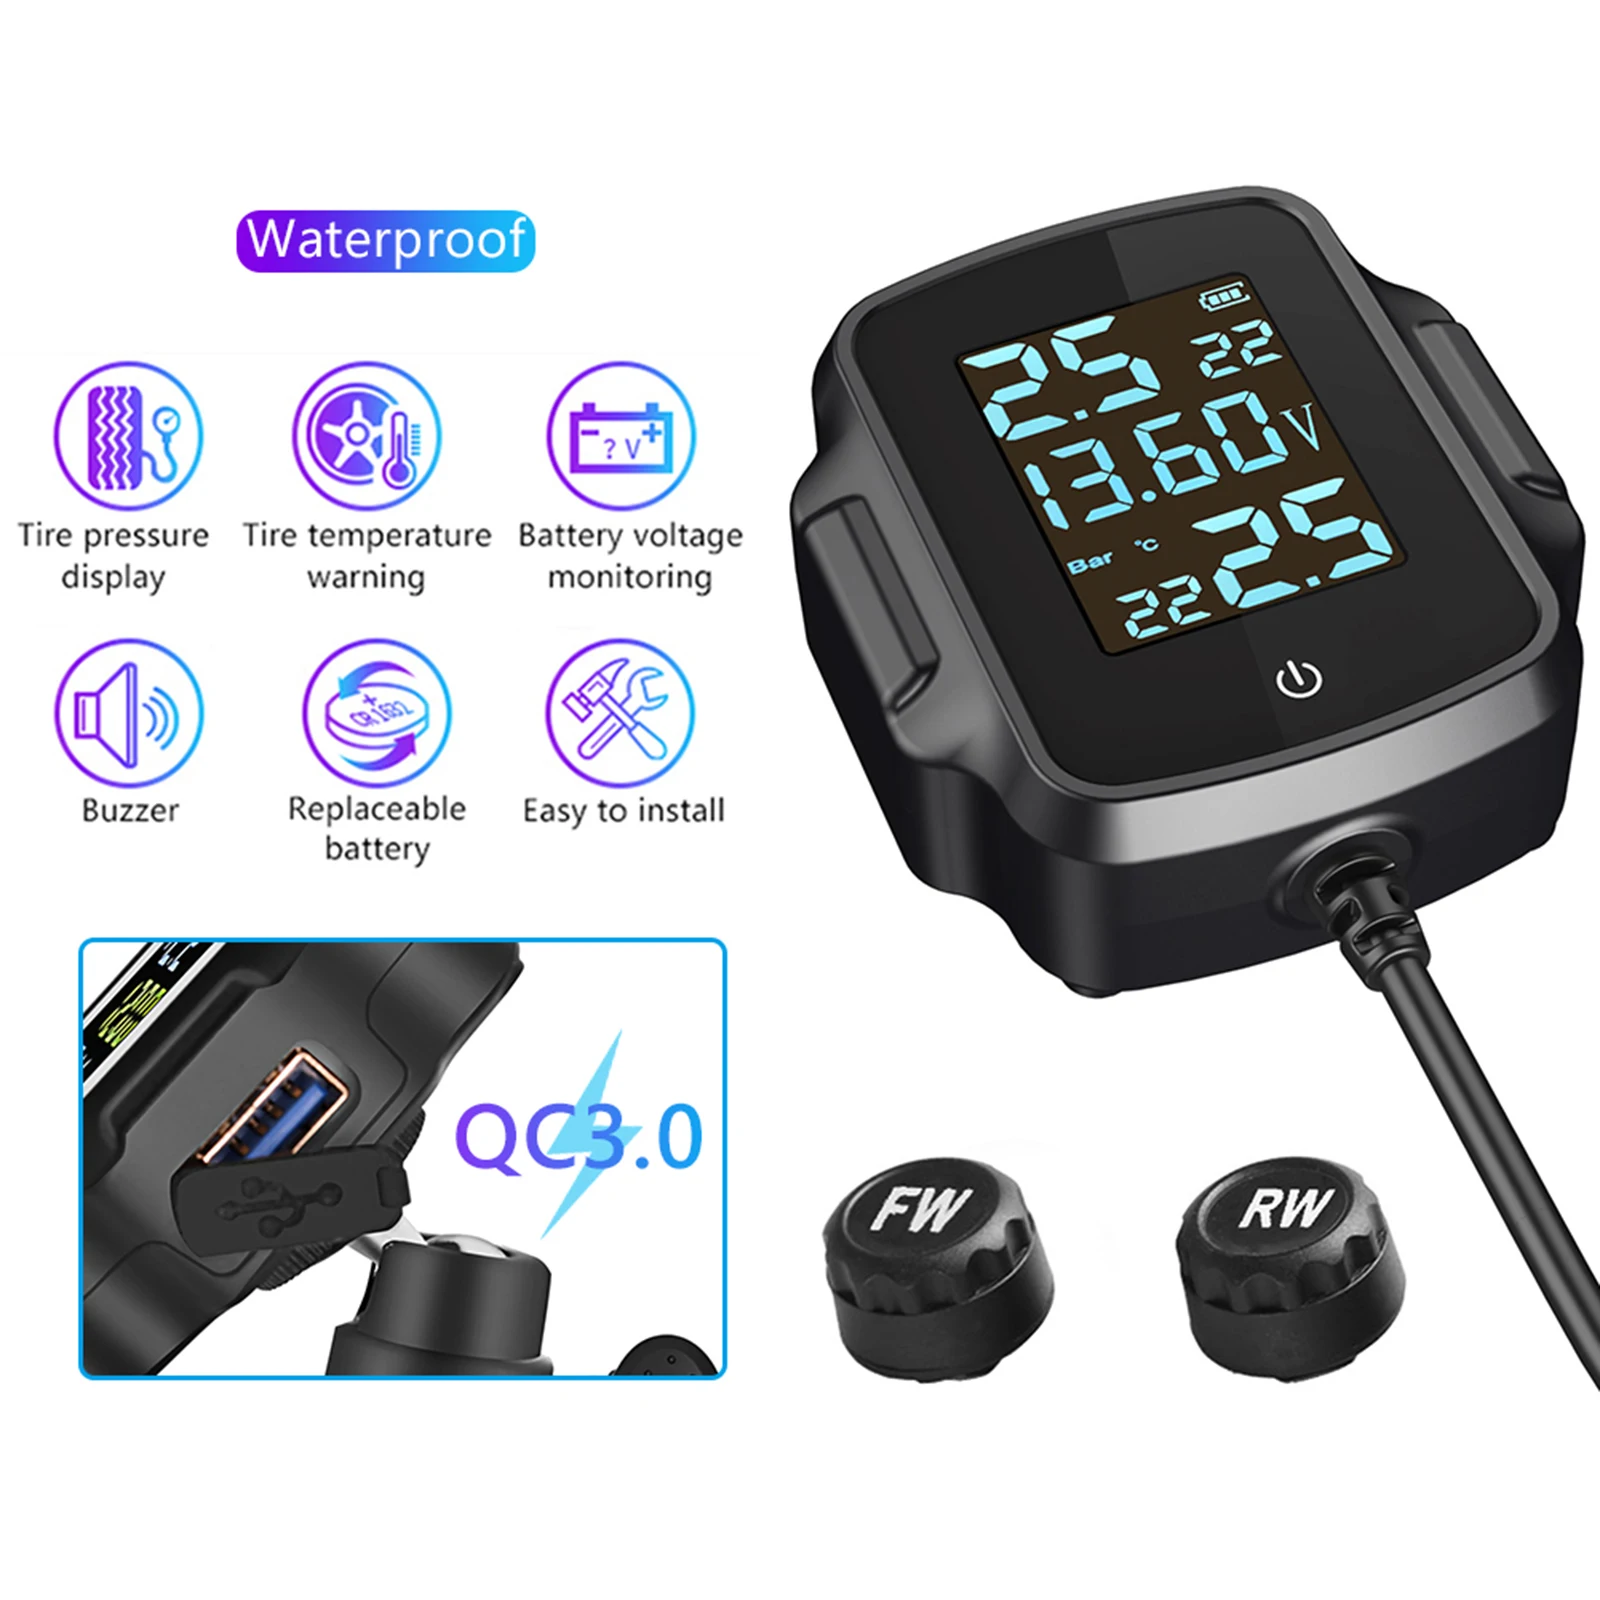 Motorcycle TPMS Wireless Tire Pressure Monitoring System, IP67 Waterproof, Easy to Install, 3.0 USB Charger for Phone Tablet